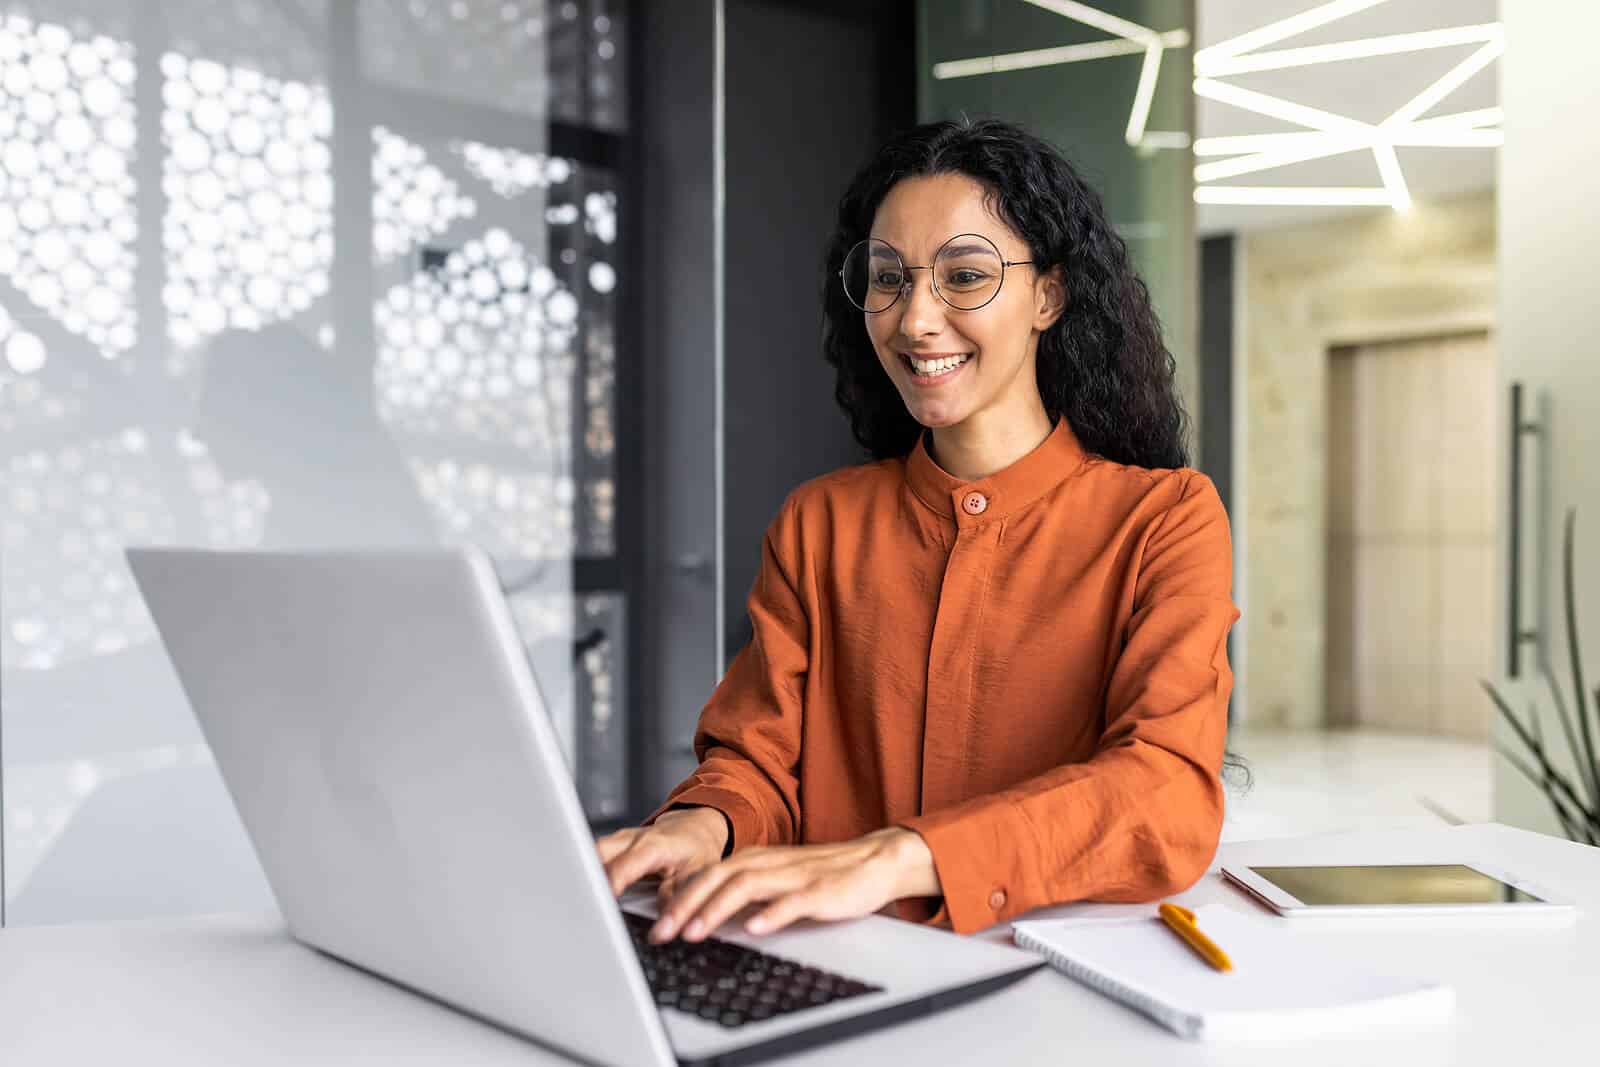 Image of a smiling woman wearing an orange shirt working on a laptop. This photo represents how you can maximize your online presence with the help of SEO.